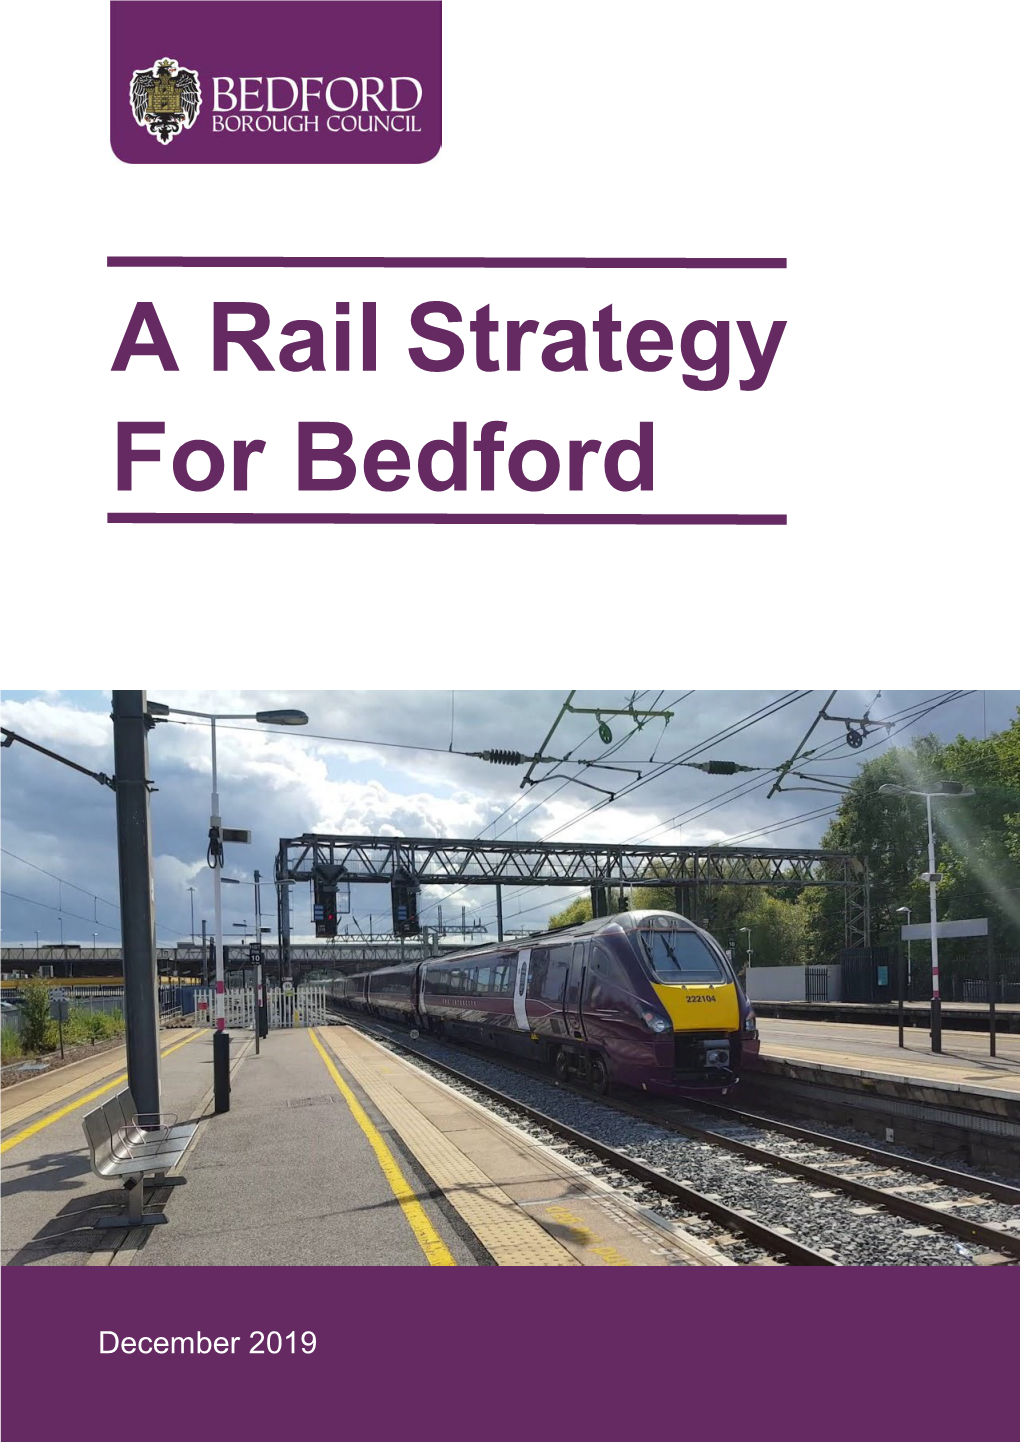 A Rail Strategy for Bedford